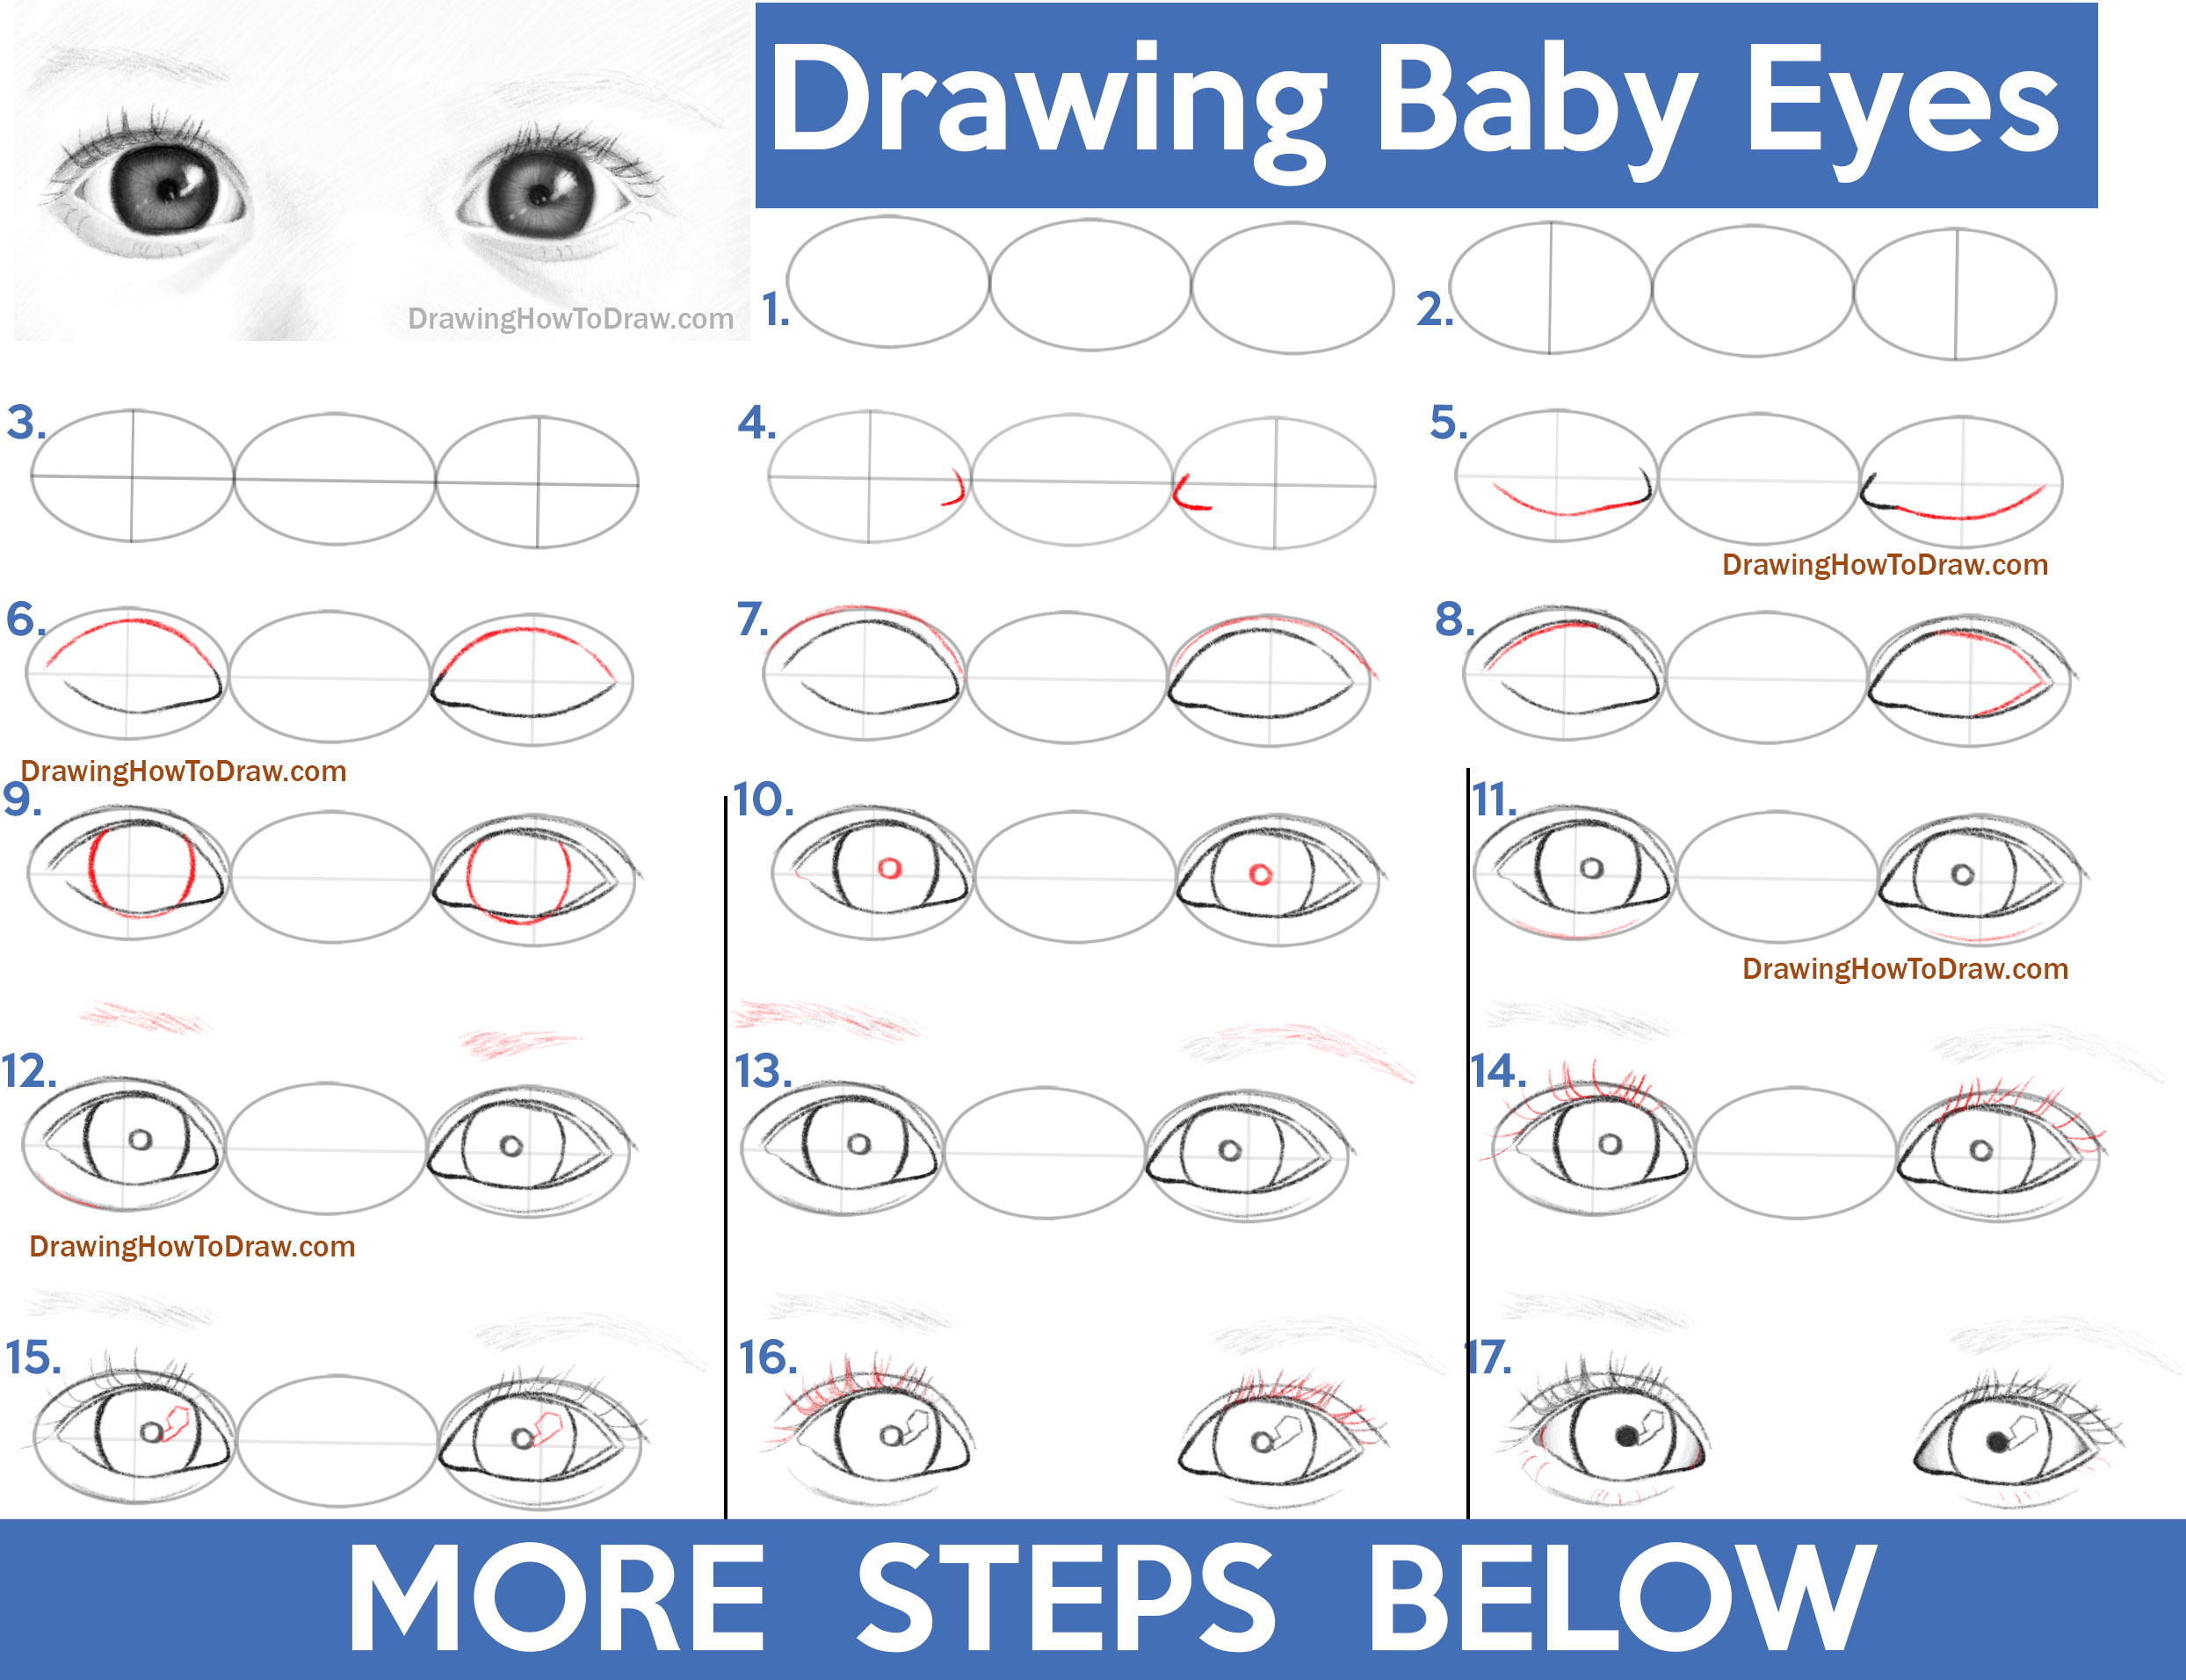 How to Draw Baby Eyes - Easy Step by Step Drawing Tutorial